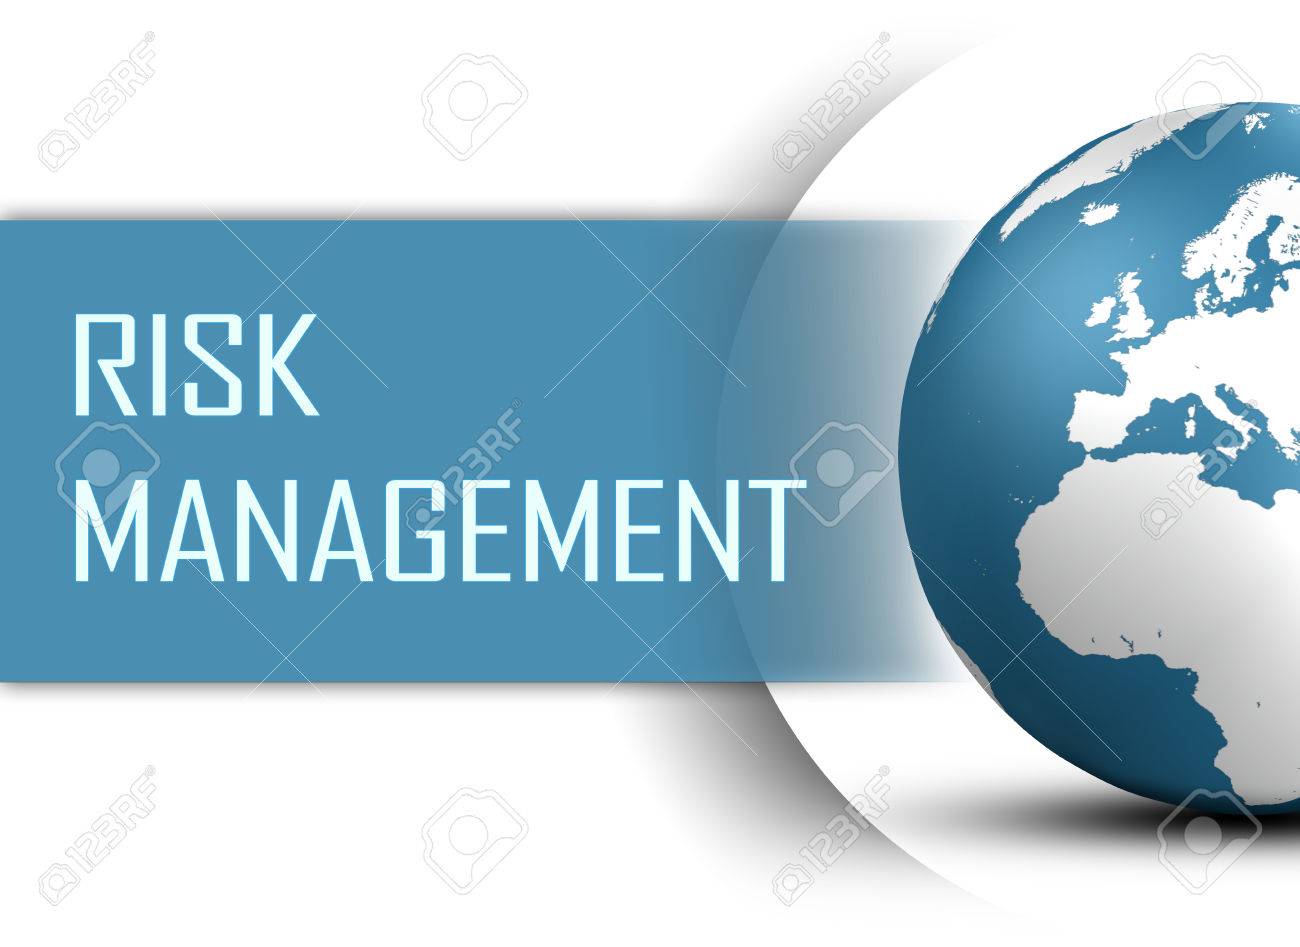 Risk Management Concept With Globe On White Background Stock Photo